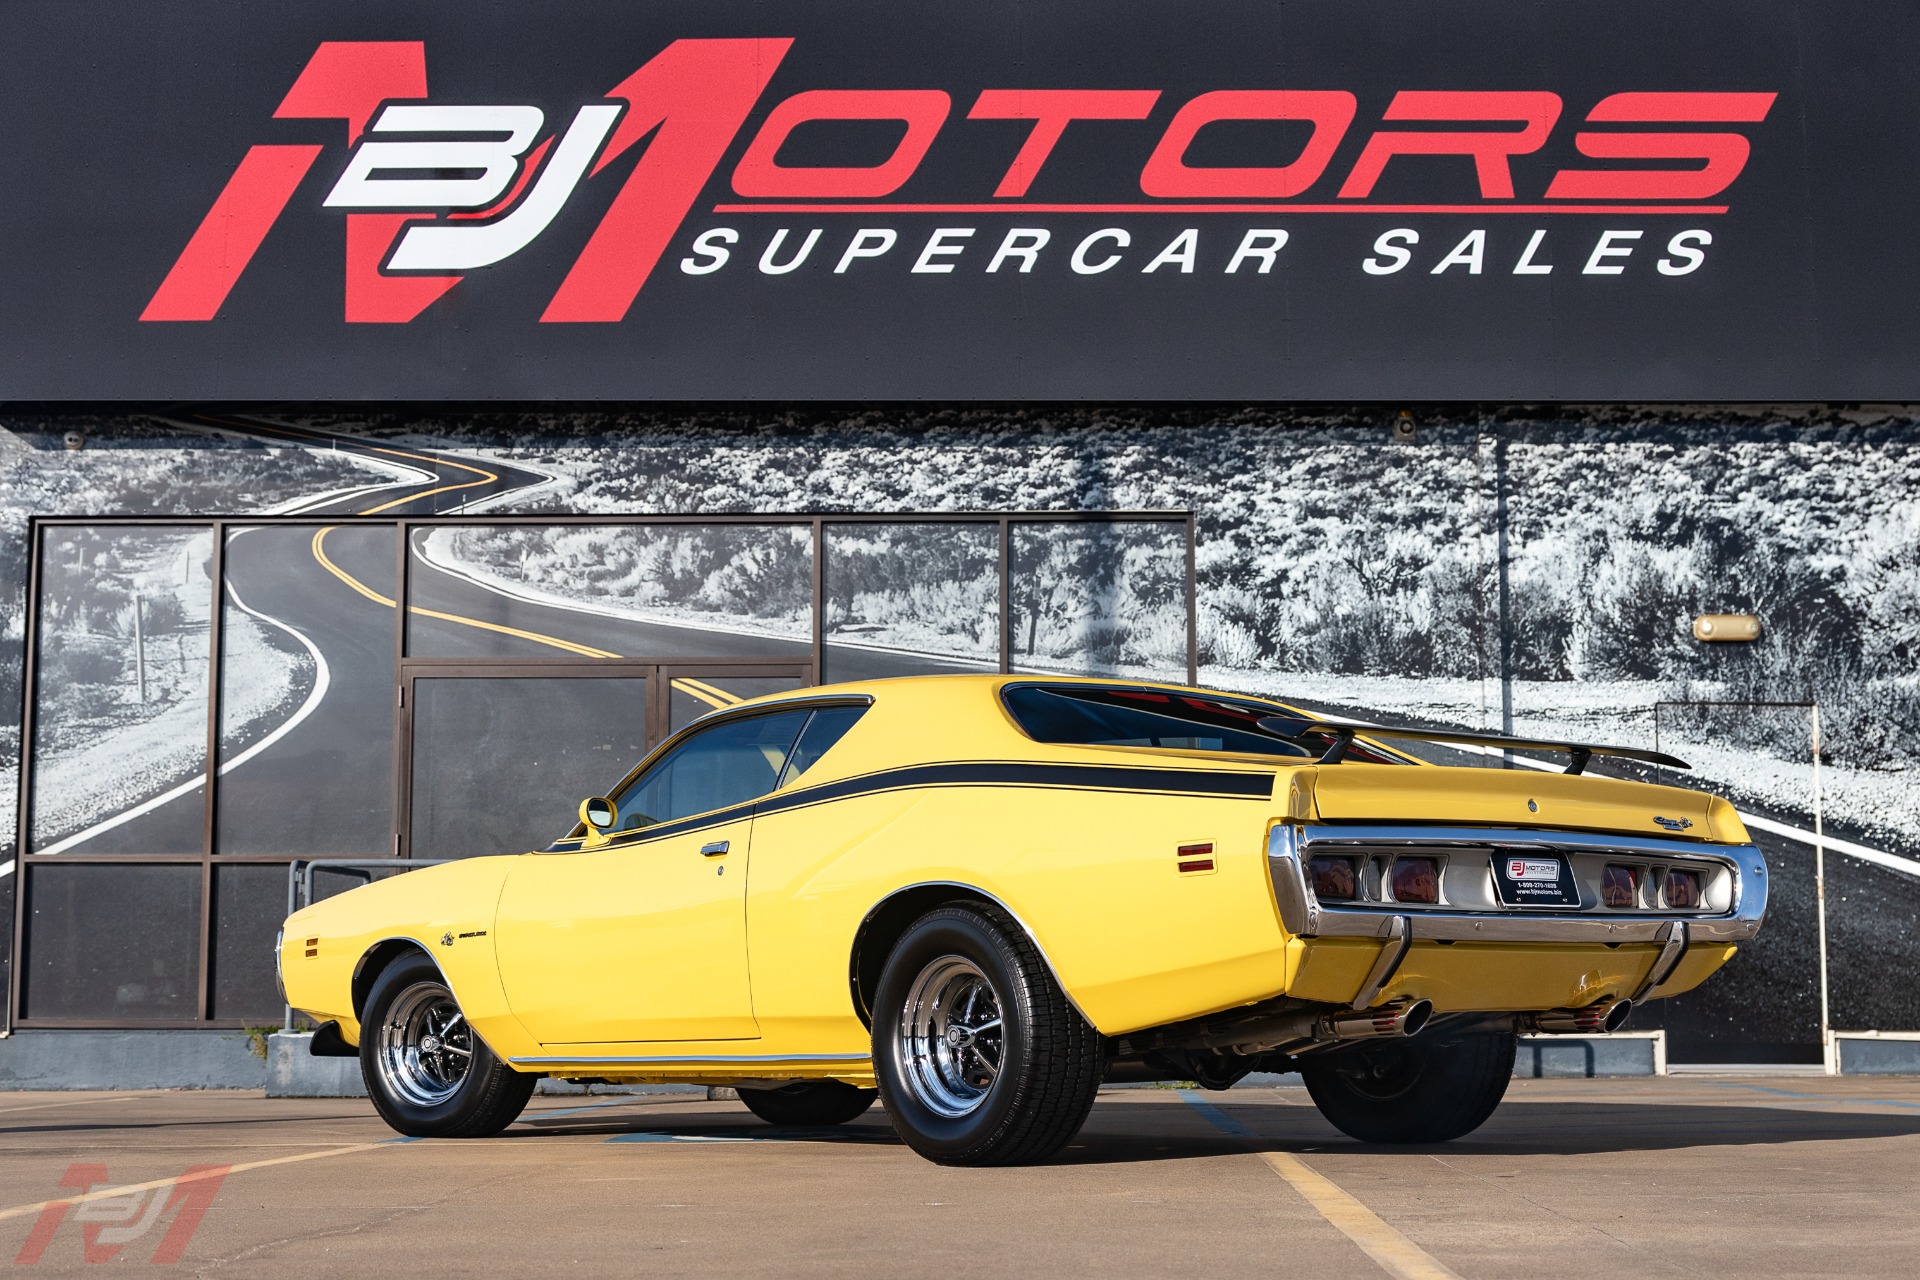 Used 1971 Dodge Charger Super Bee 440 Six Pack For Sale (Special Pricing) |  BJ Motors Stock #1G151691